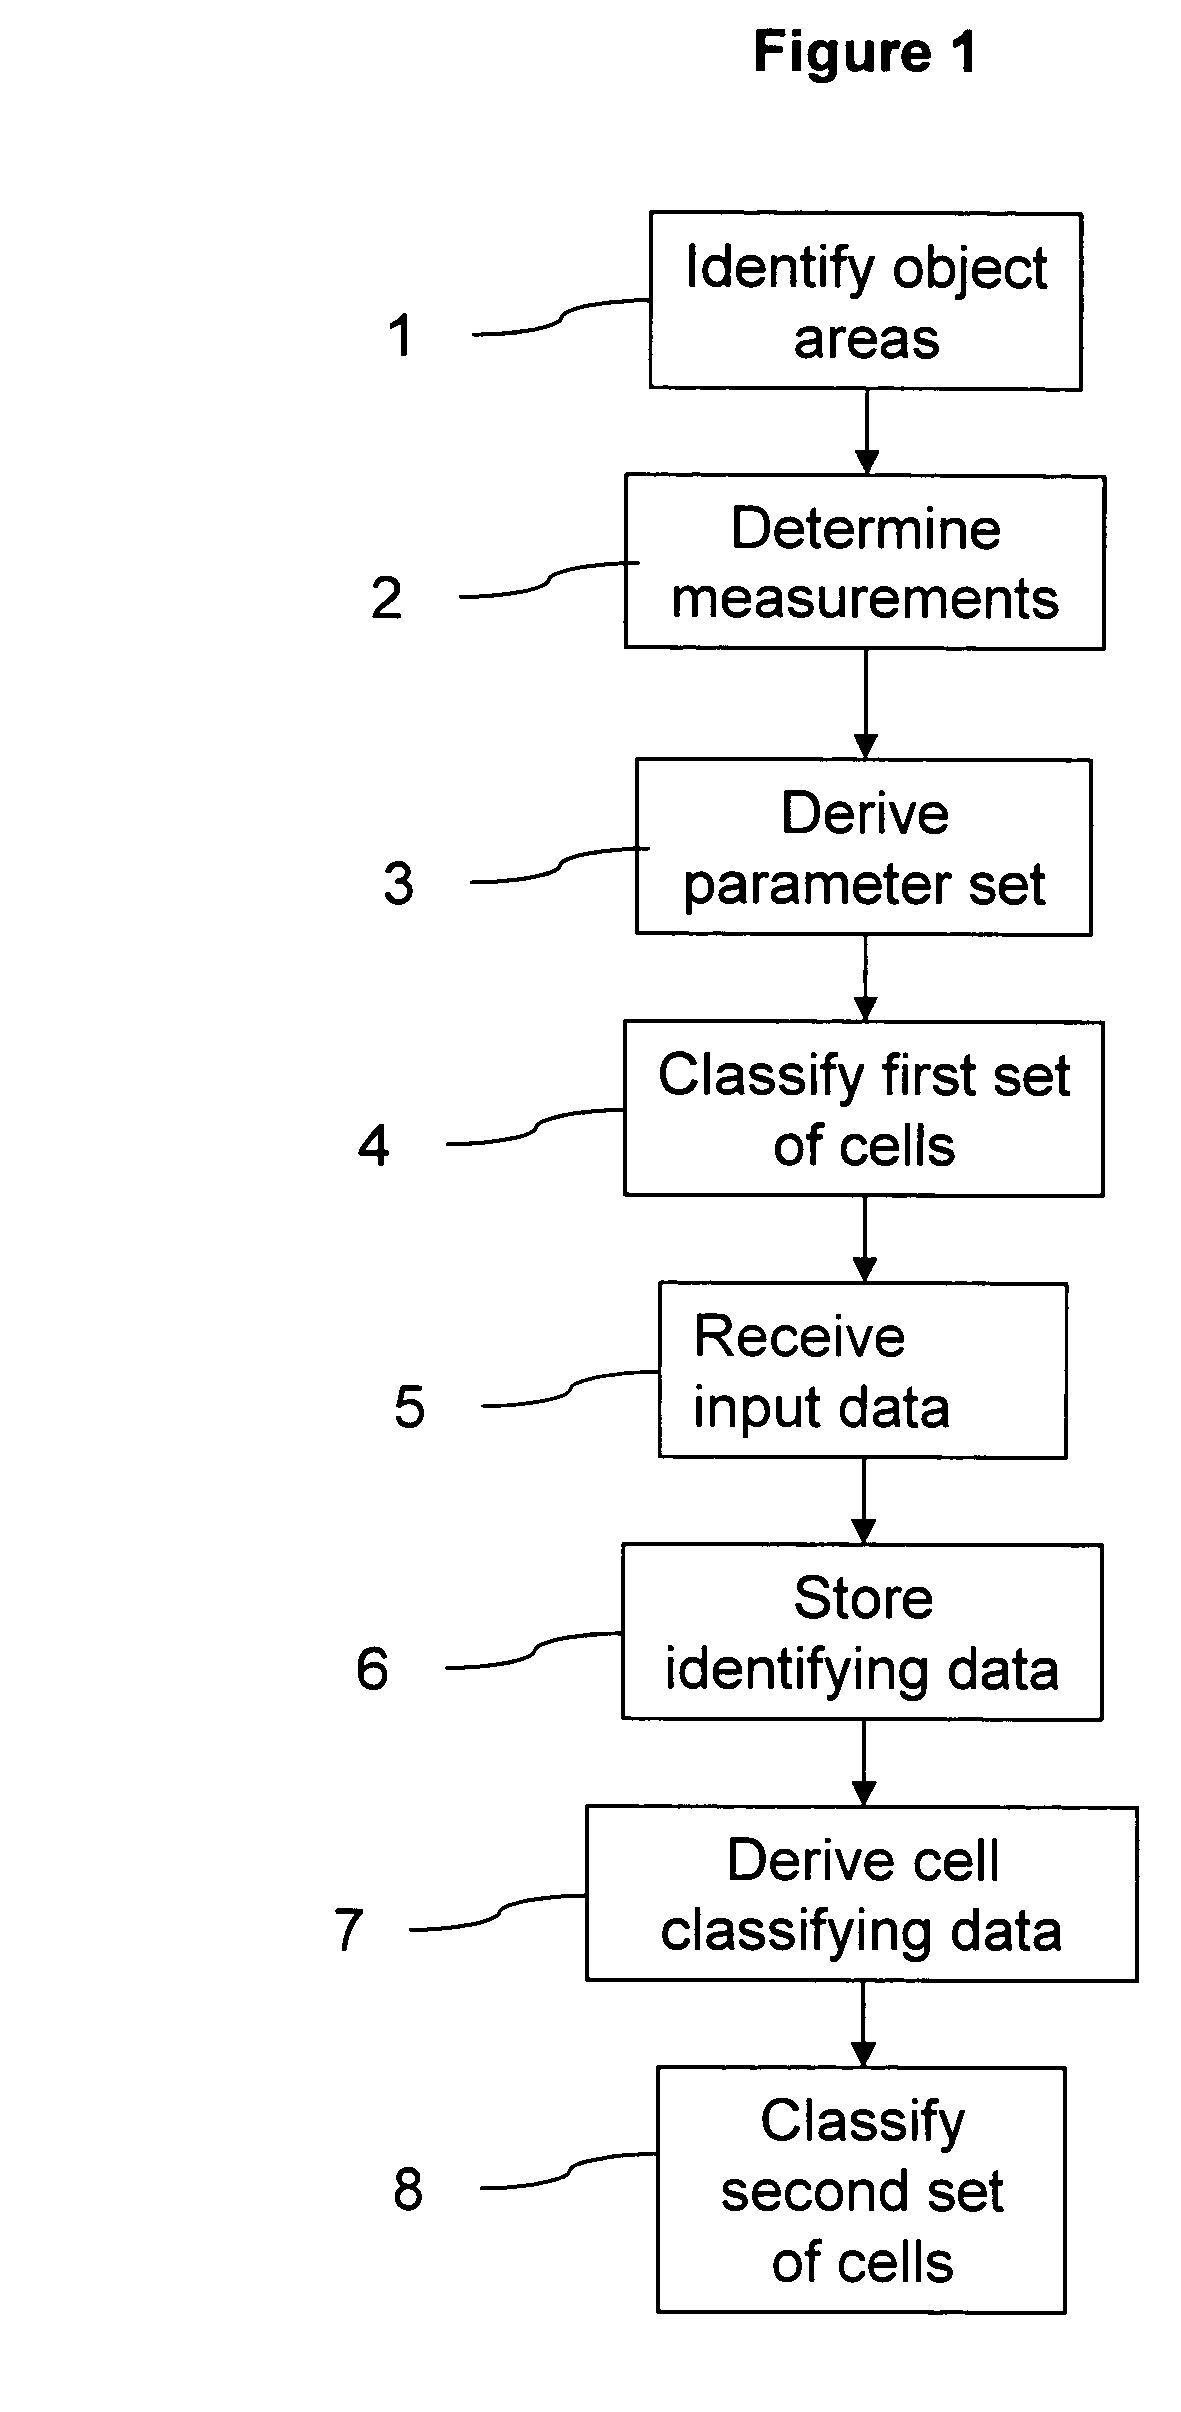 Classification of cells into subpopulations using cell classifying data